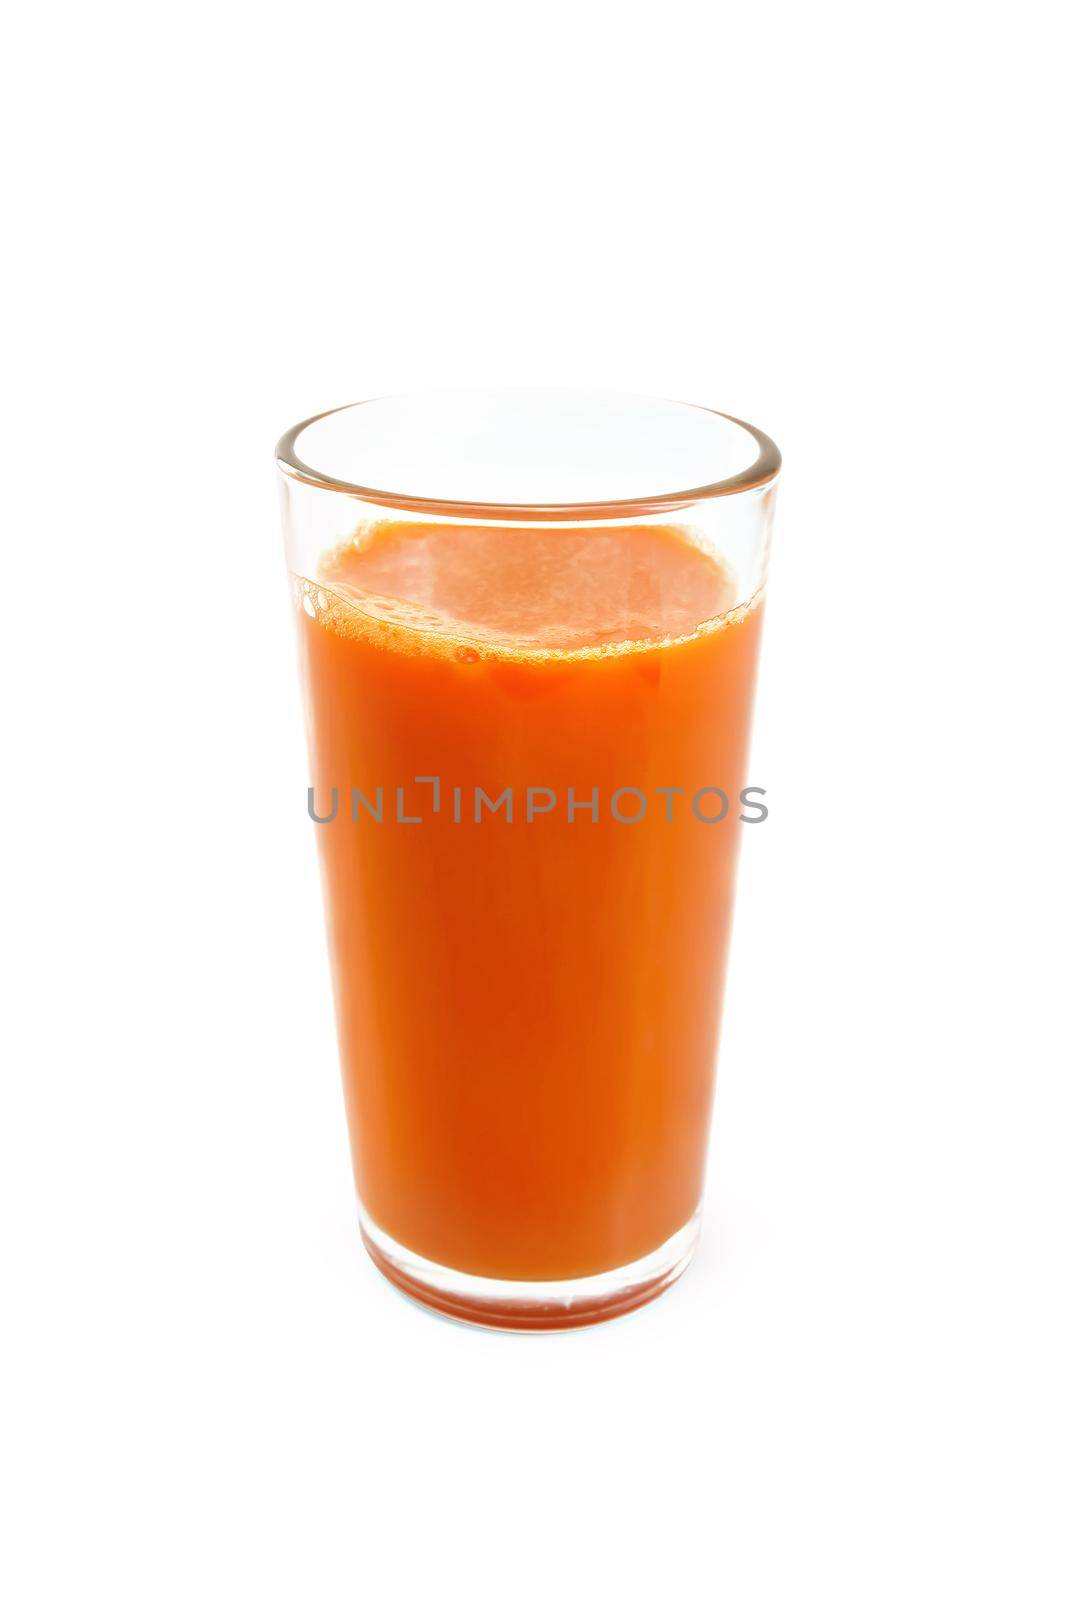 Carrot juice in high glassful isolated on white background